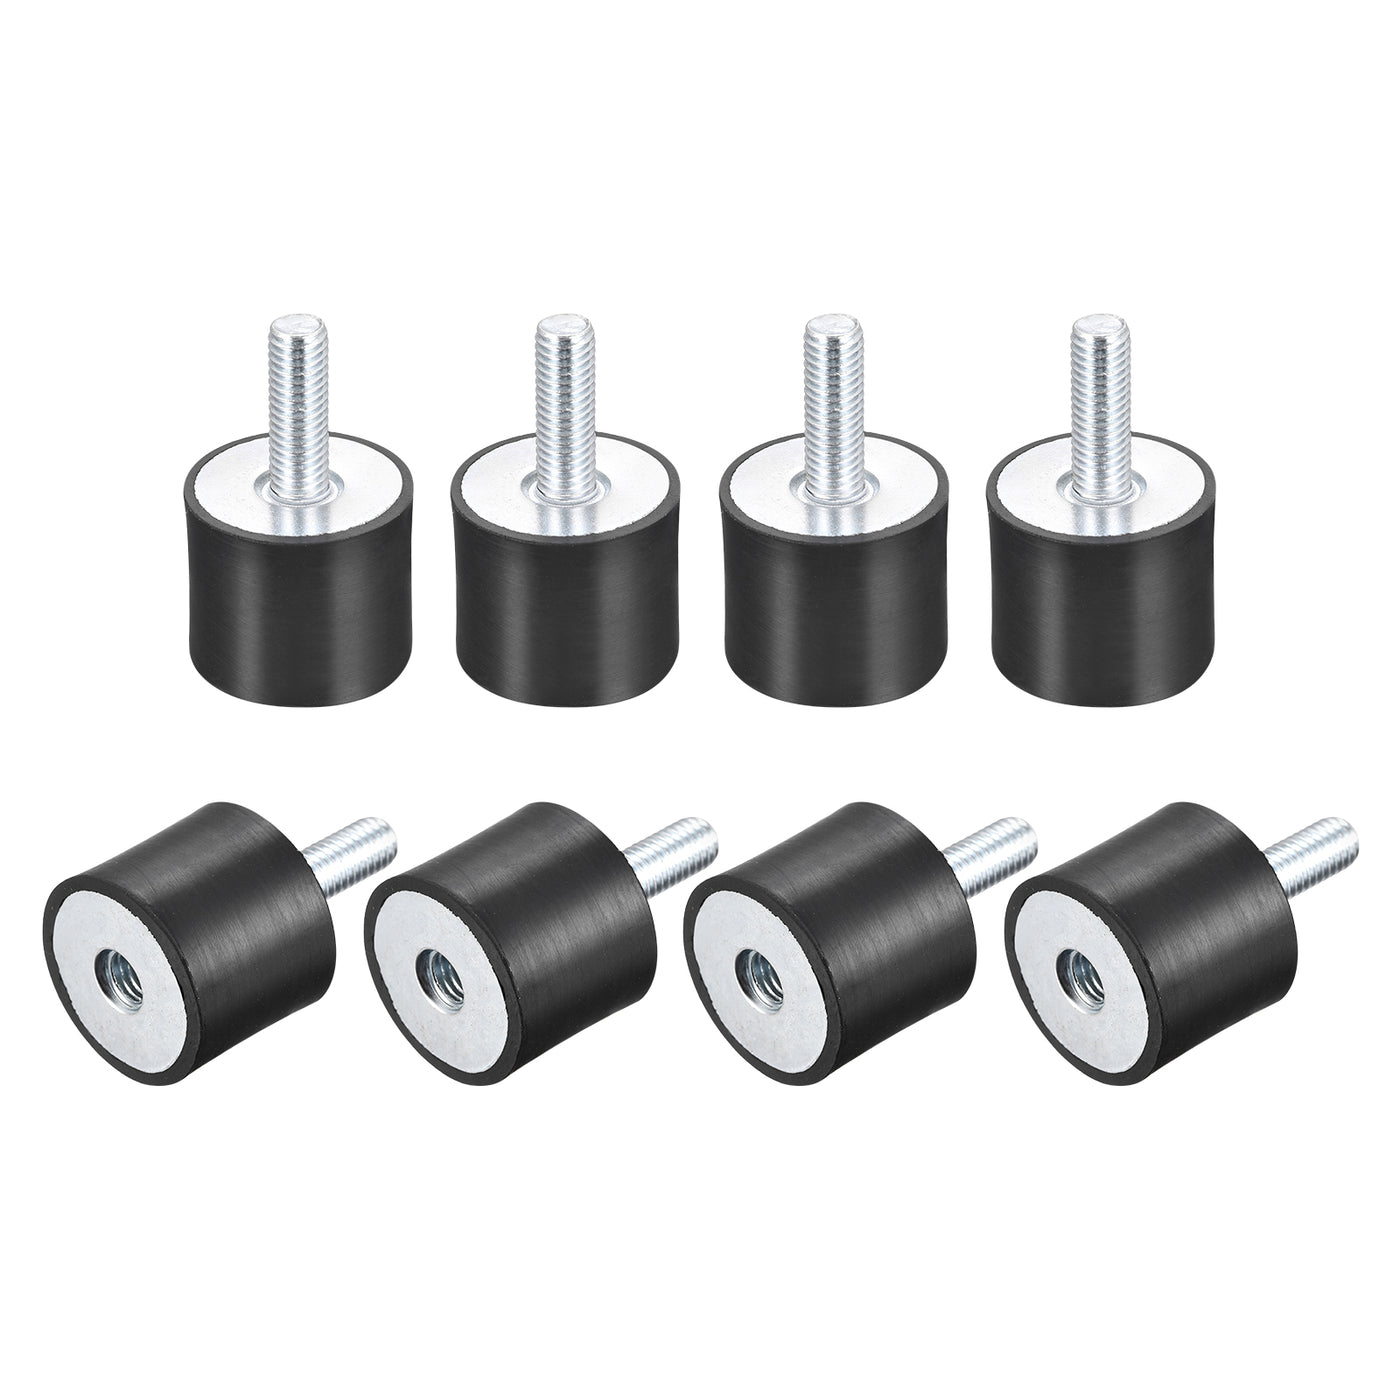 uxcell Uxcell Rubber Mount 8pcs M8 Male/Female Vibration Isolator Shock Absorber, D30mmxH25mm